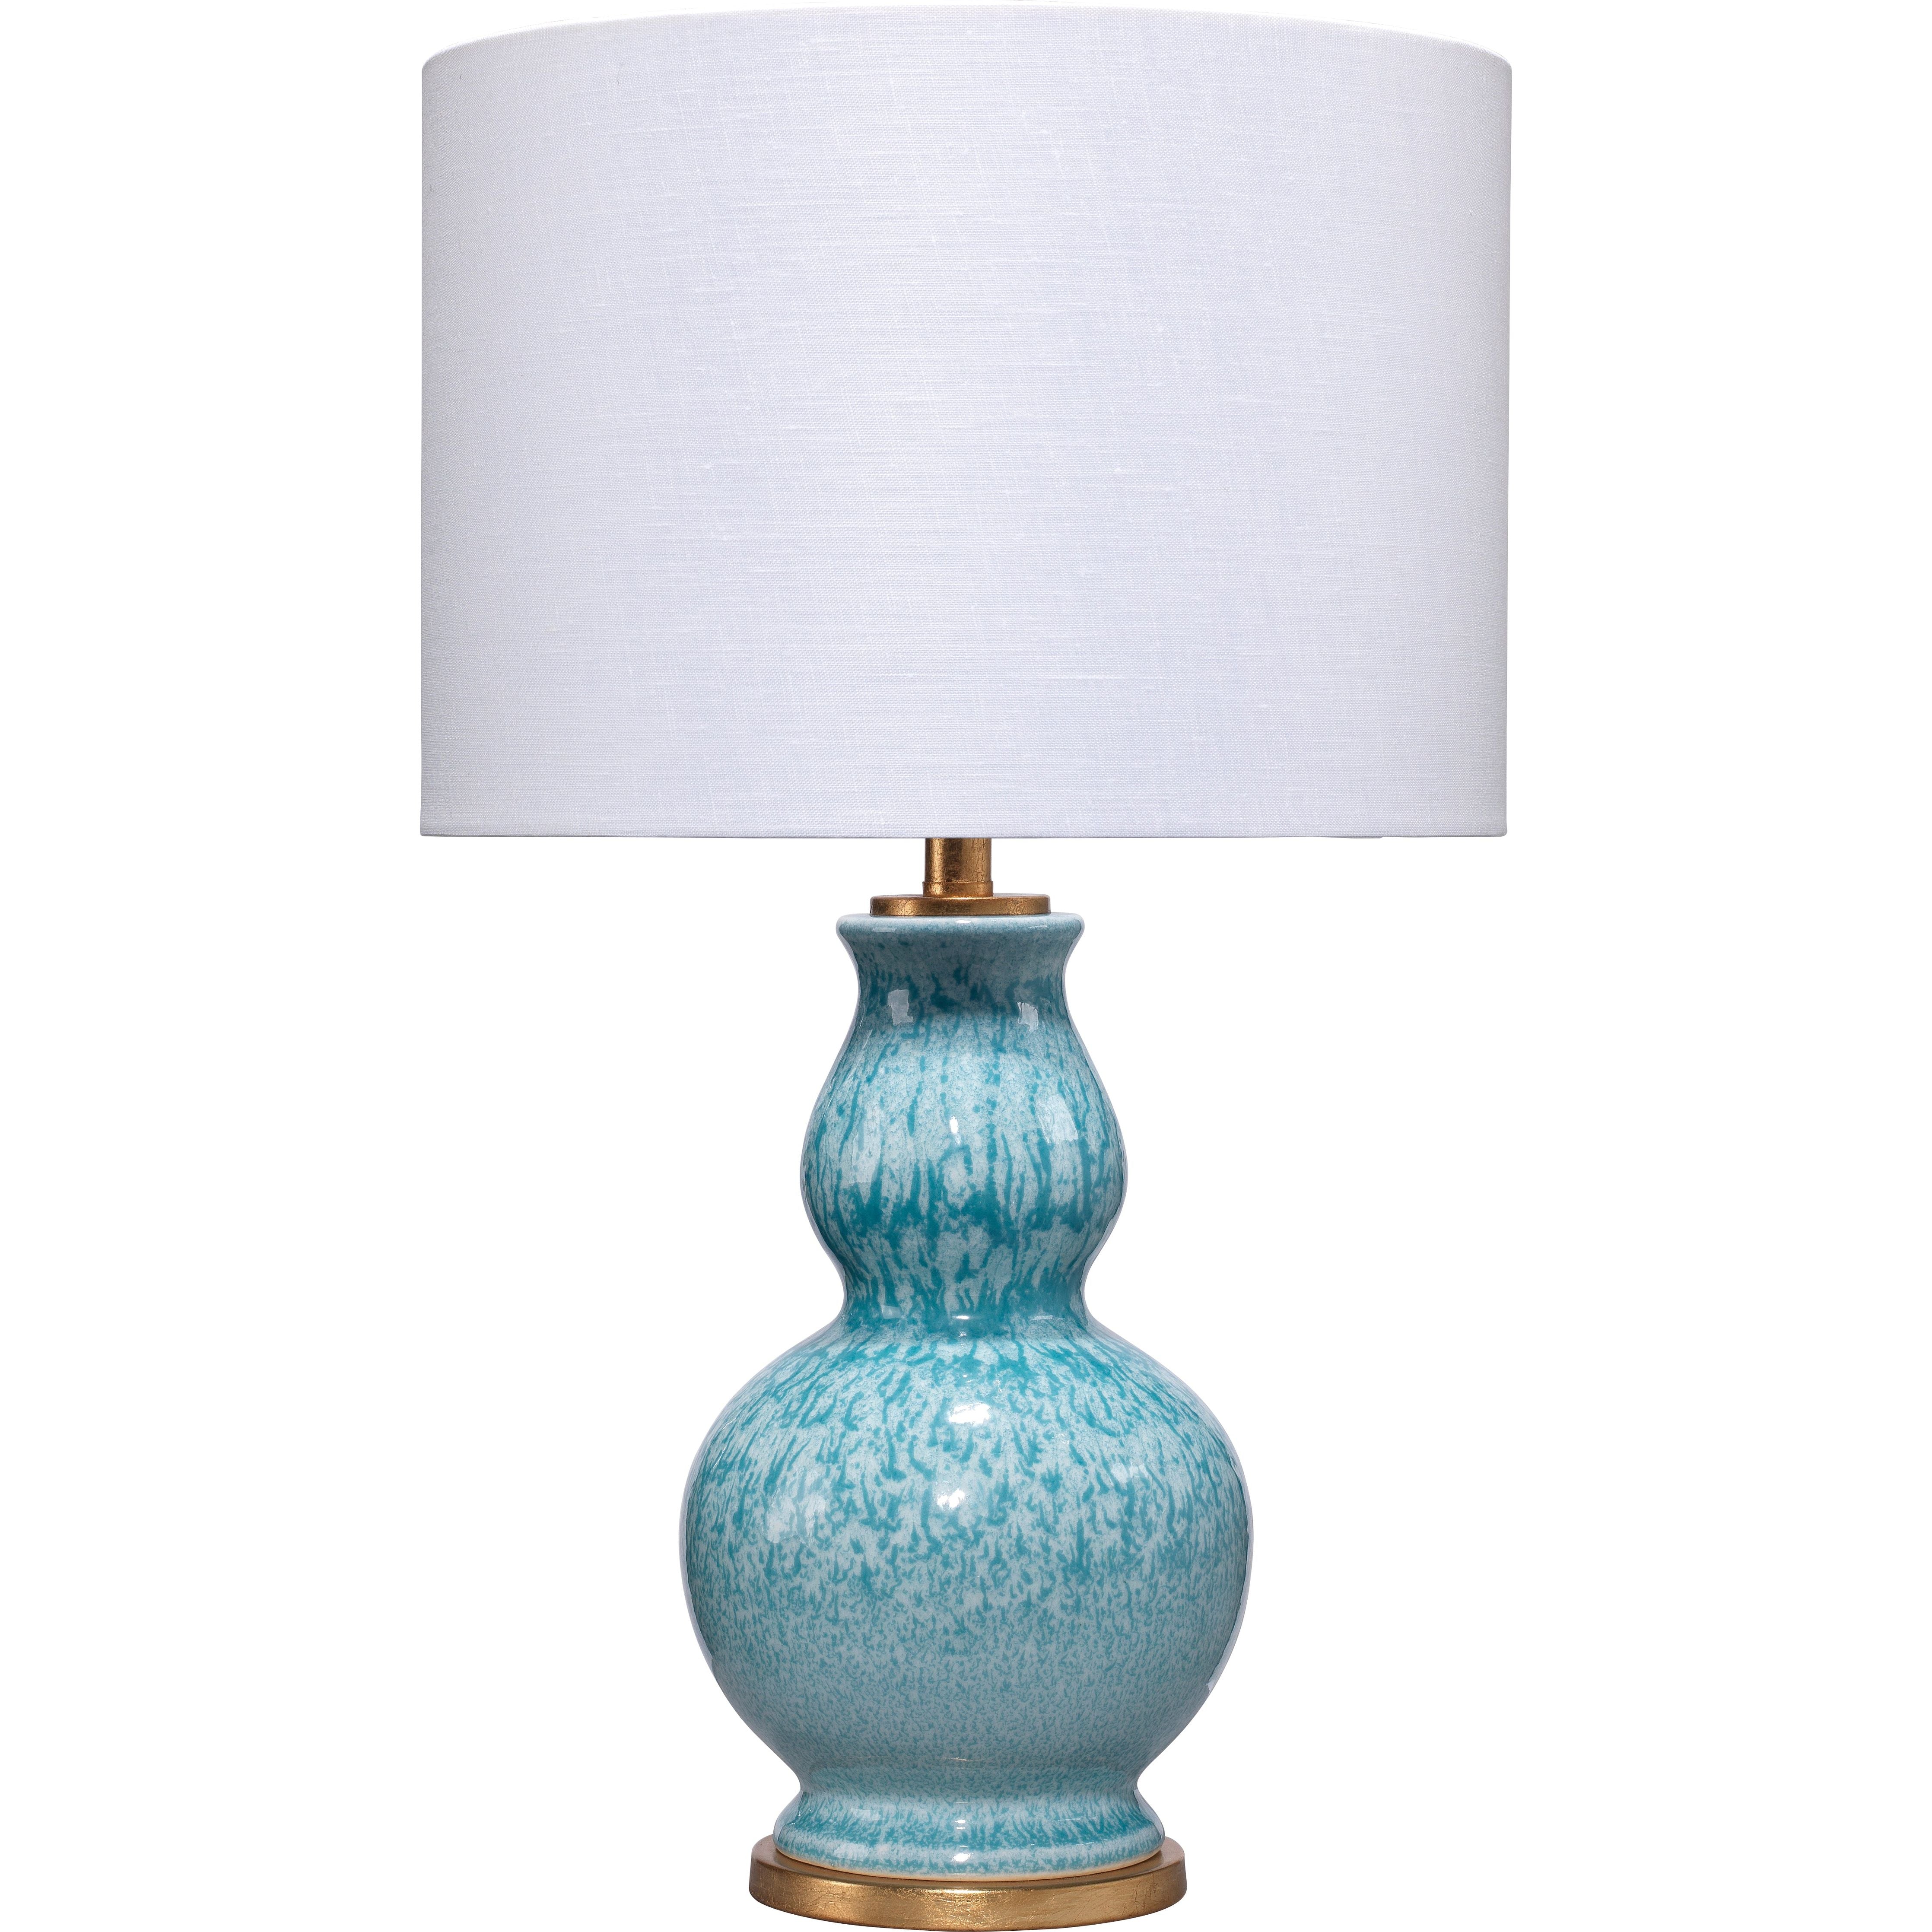 Jamie Young Company - LS9WHITNEYBL - Whitney Table Lamp - Whitney - Blue